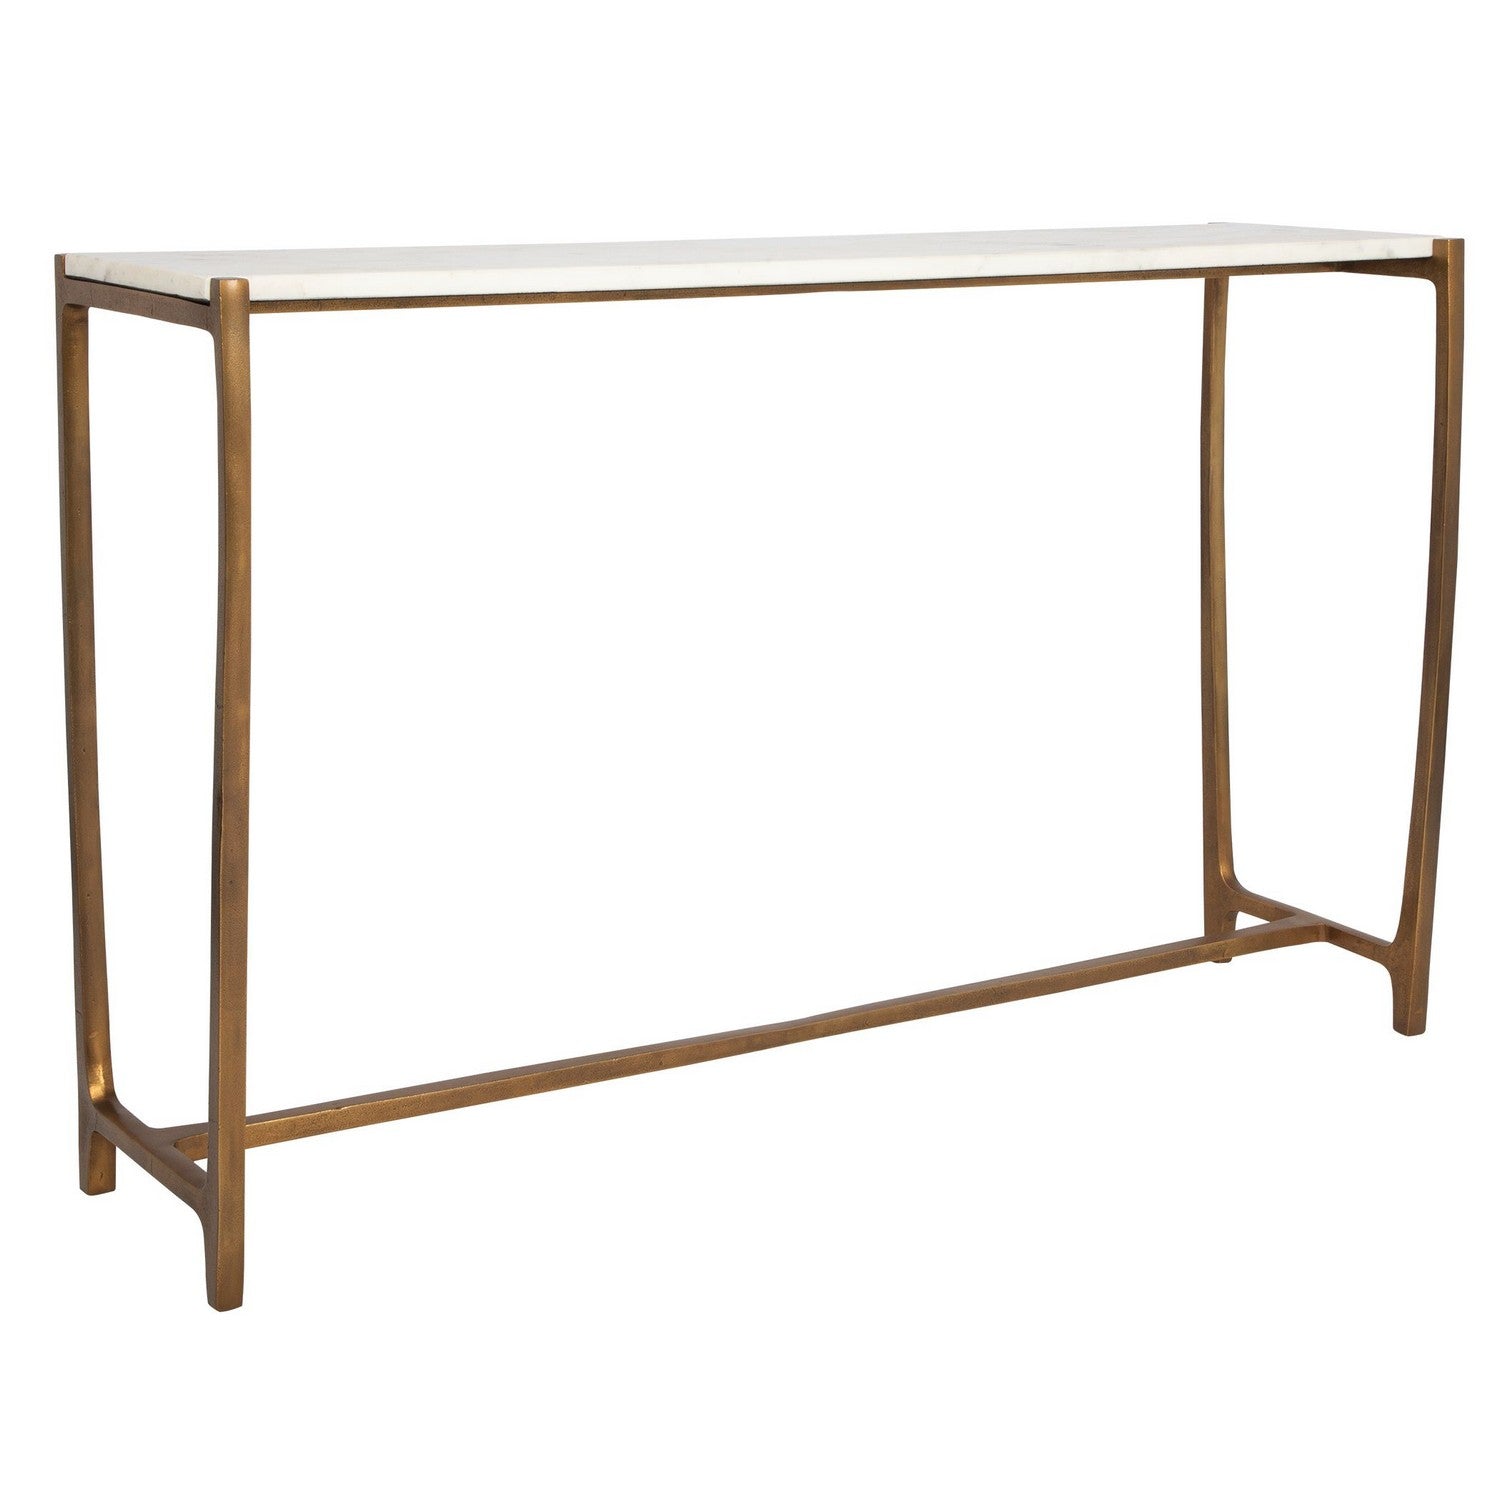 Uttermost - 22964 - Console Table - Affinity - Antique Gold